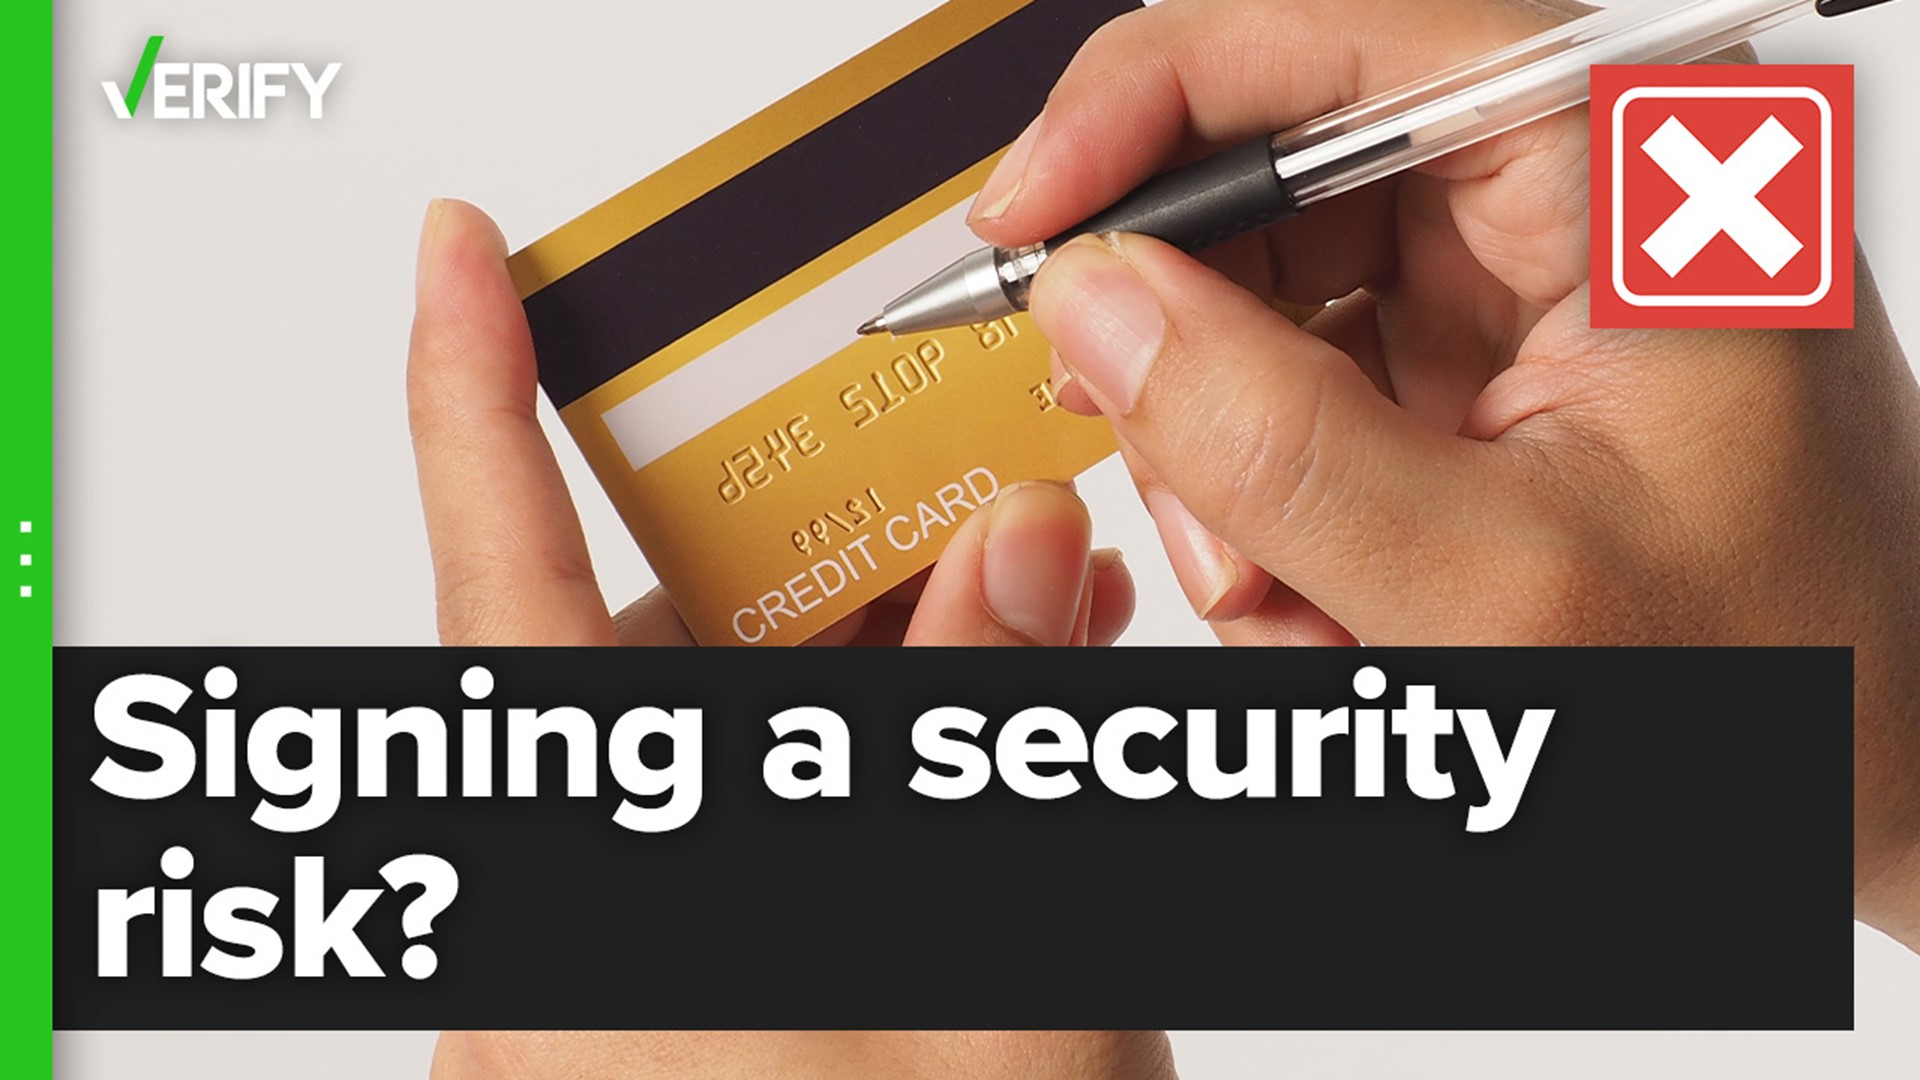 Signing the back of your credit or debit card is generally safe, and some credit cards are not valid without a signature.